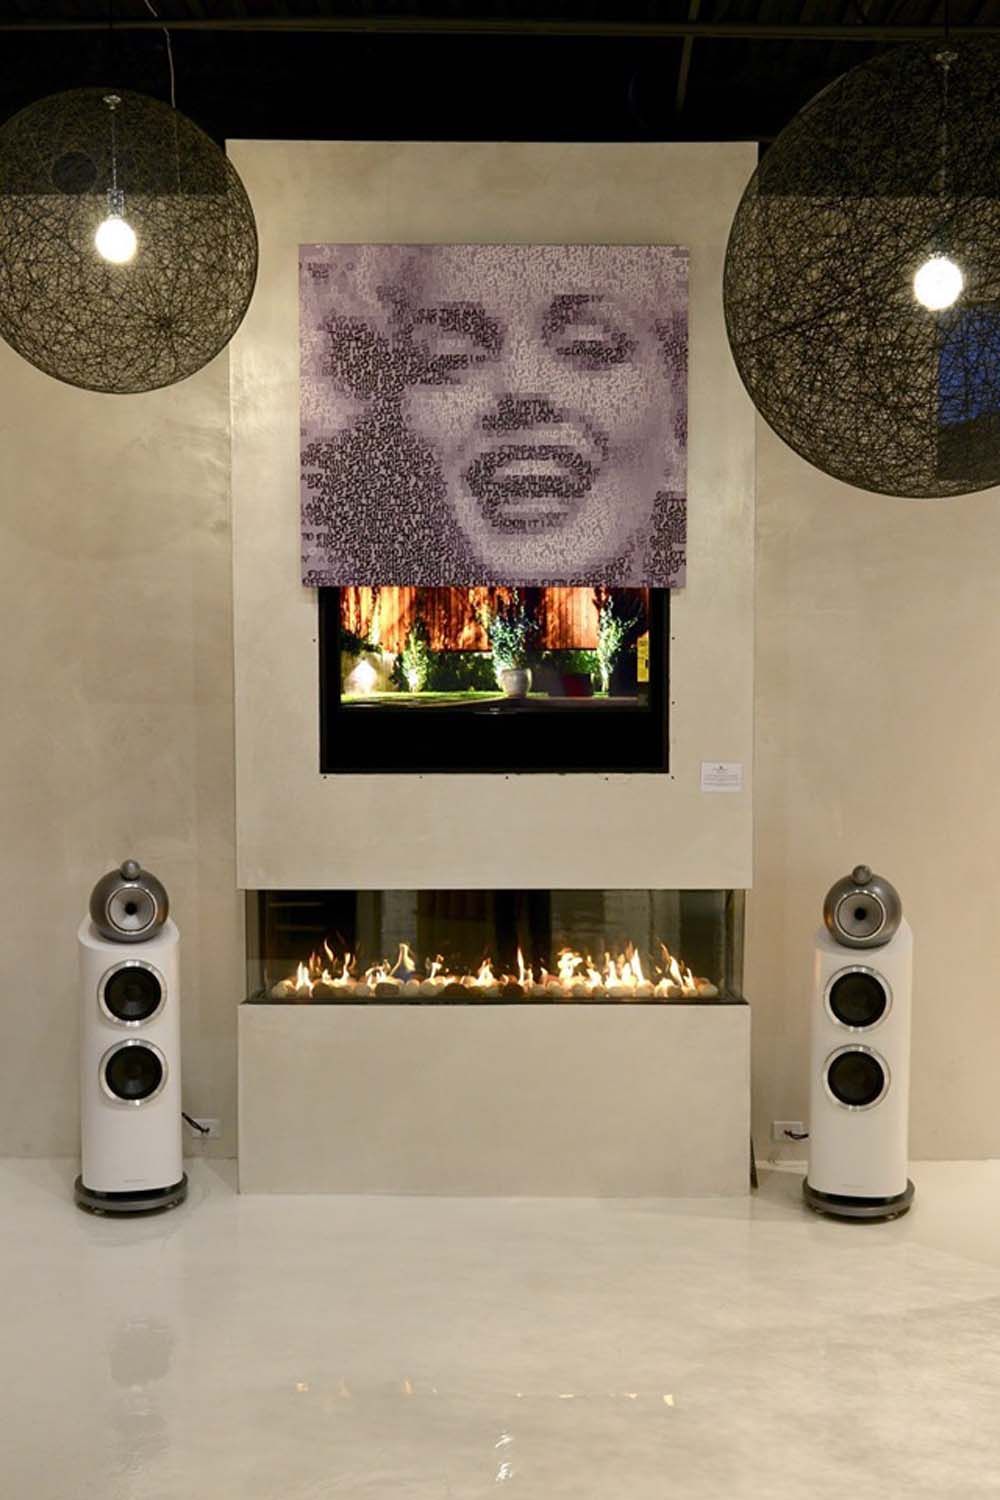 picture of marilyn monroe over fireplace with high performance audio